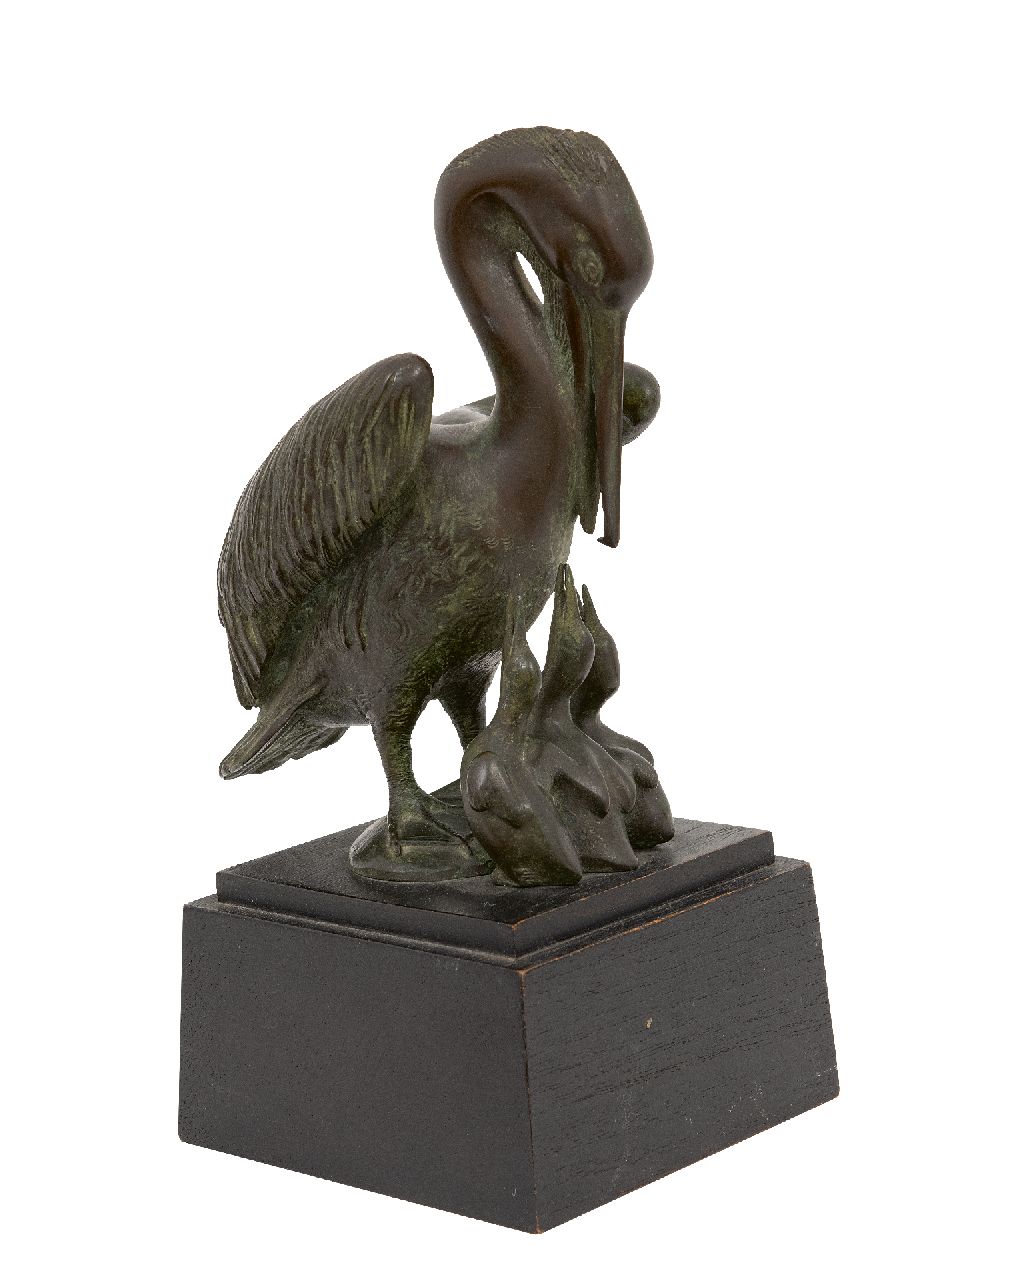 Soukop W.  | Willi Soukop, A pelican with her young, bronze 18.0 x 10.5 cm